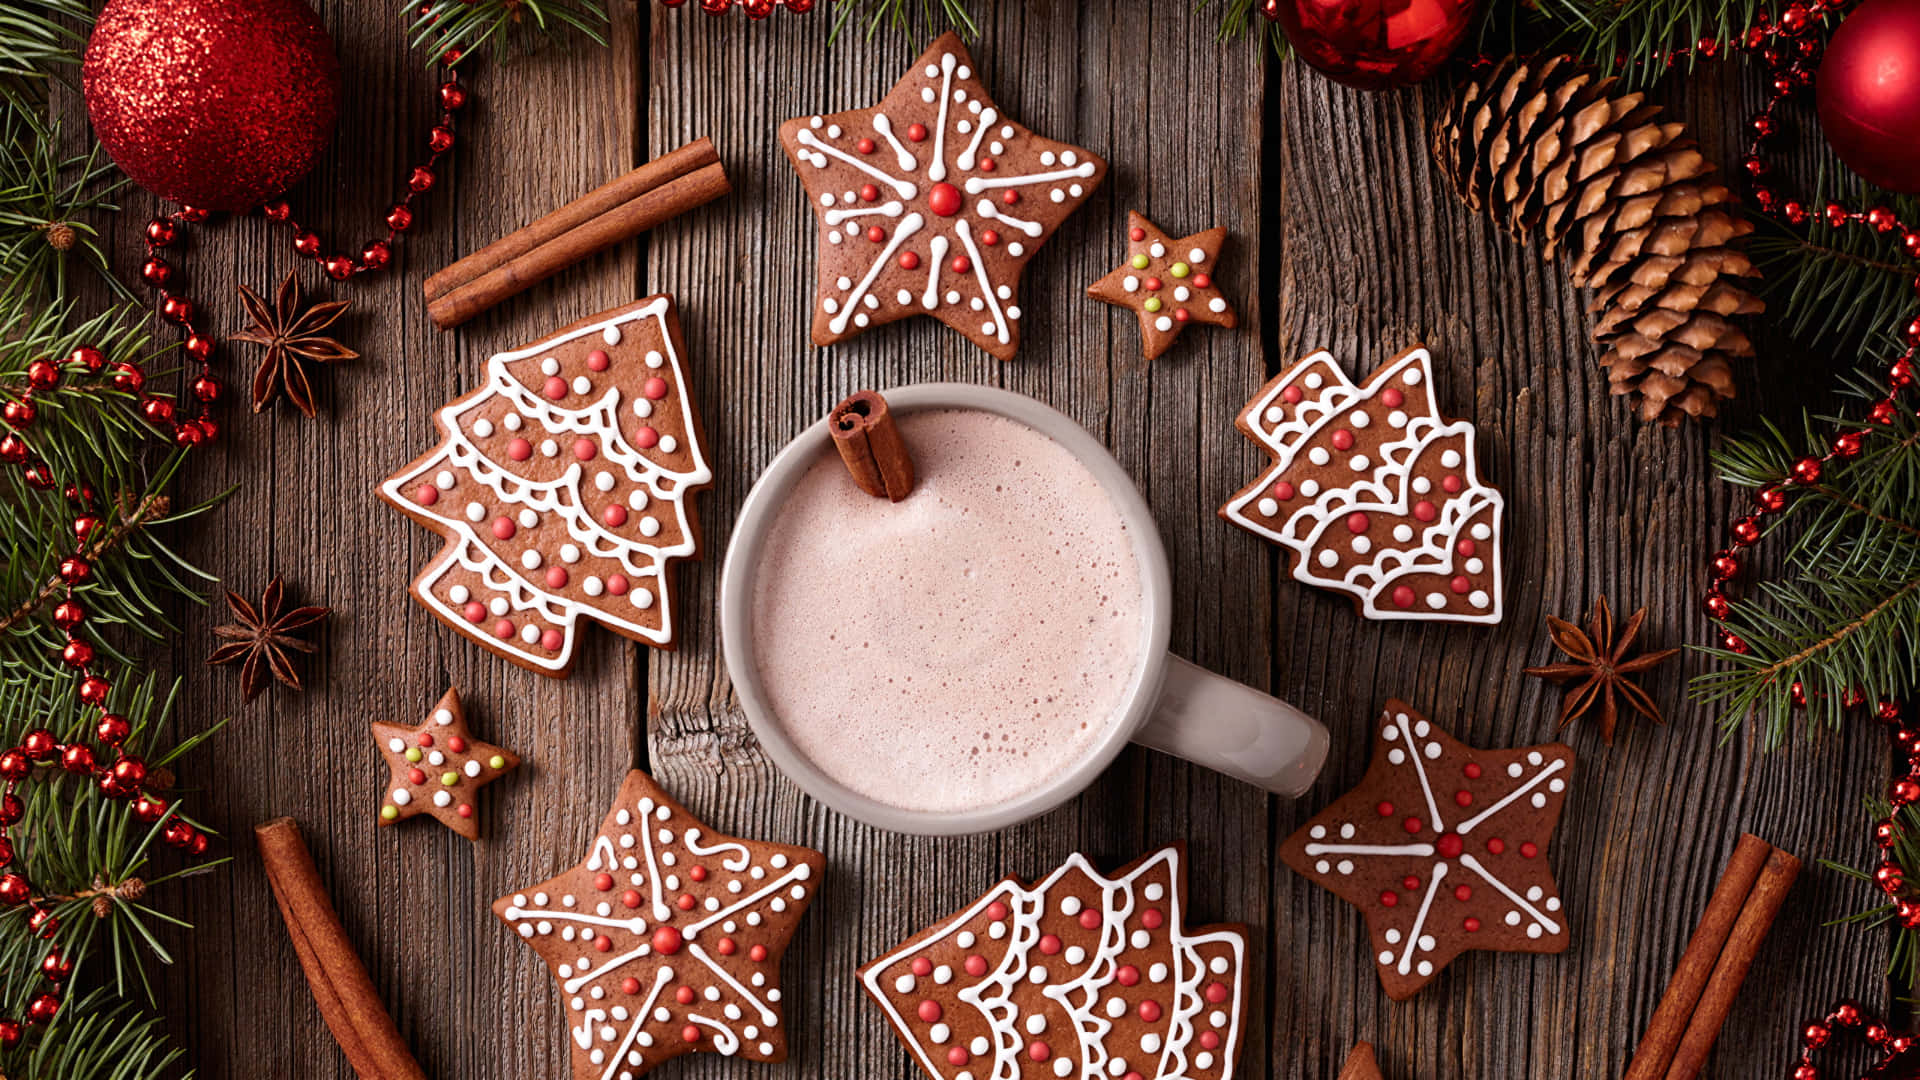 A Cup Of Hot Chocolate With Gingerbread Cookies And Ornaments